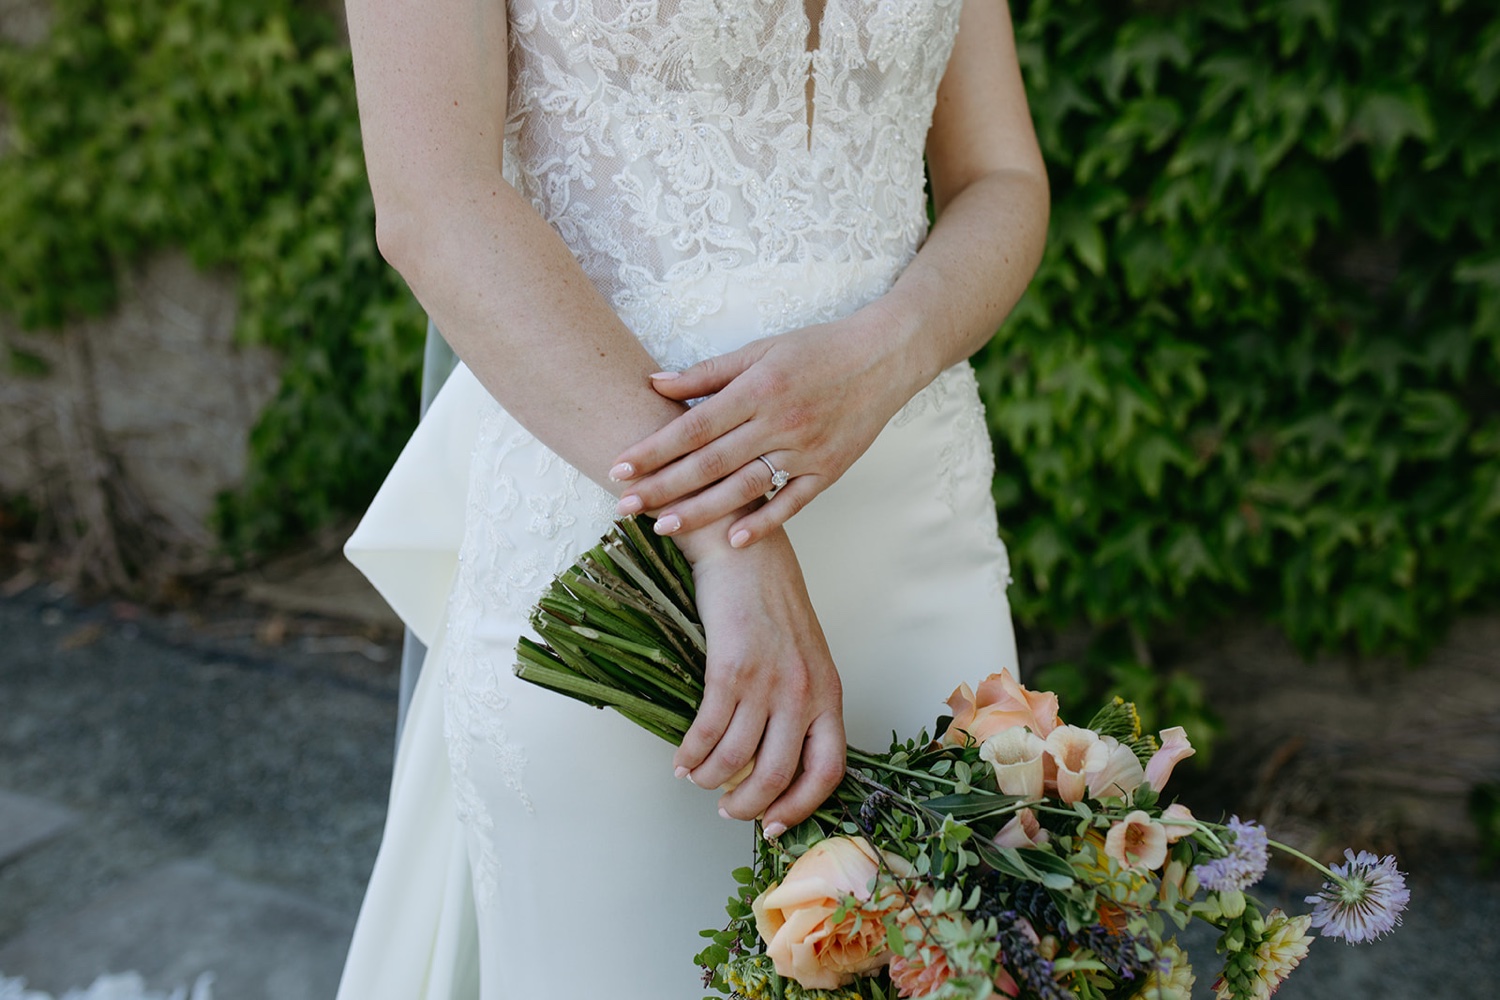 Bride holds a bouquet of flowers on her wedding day